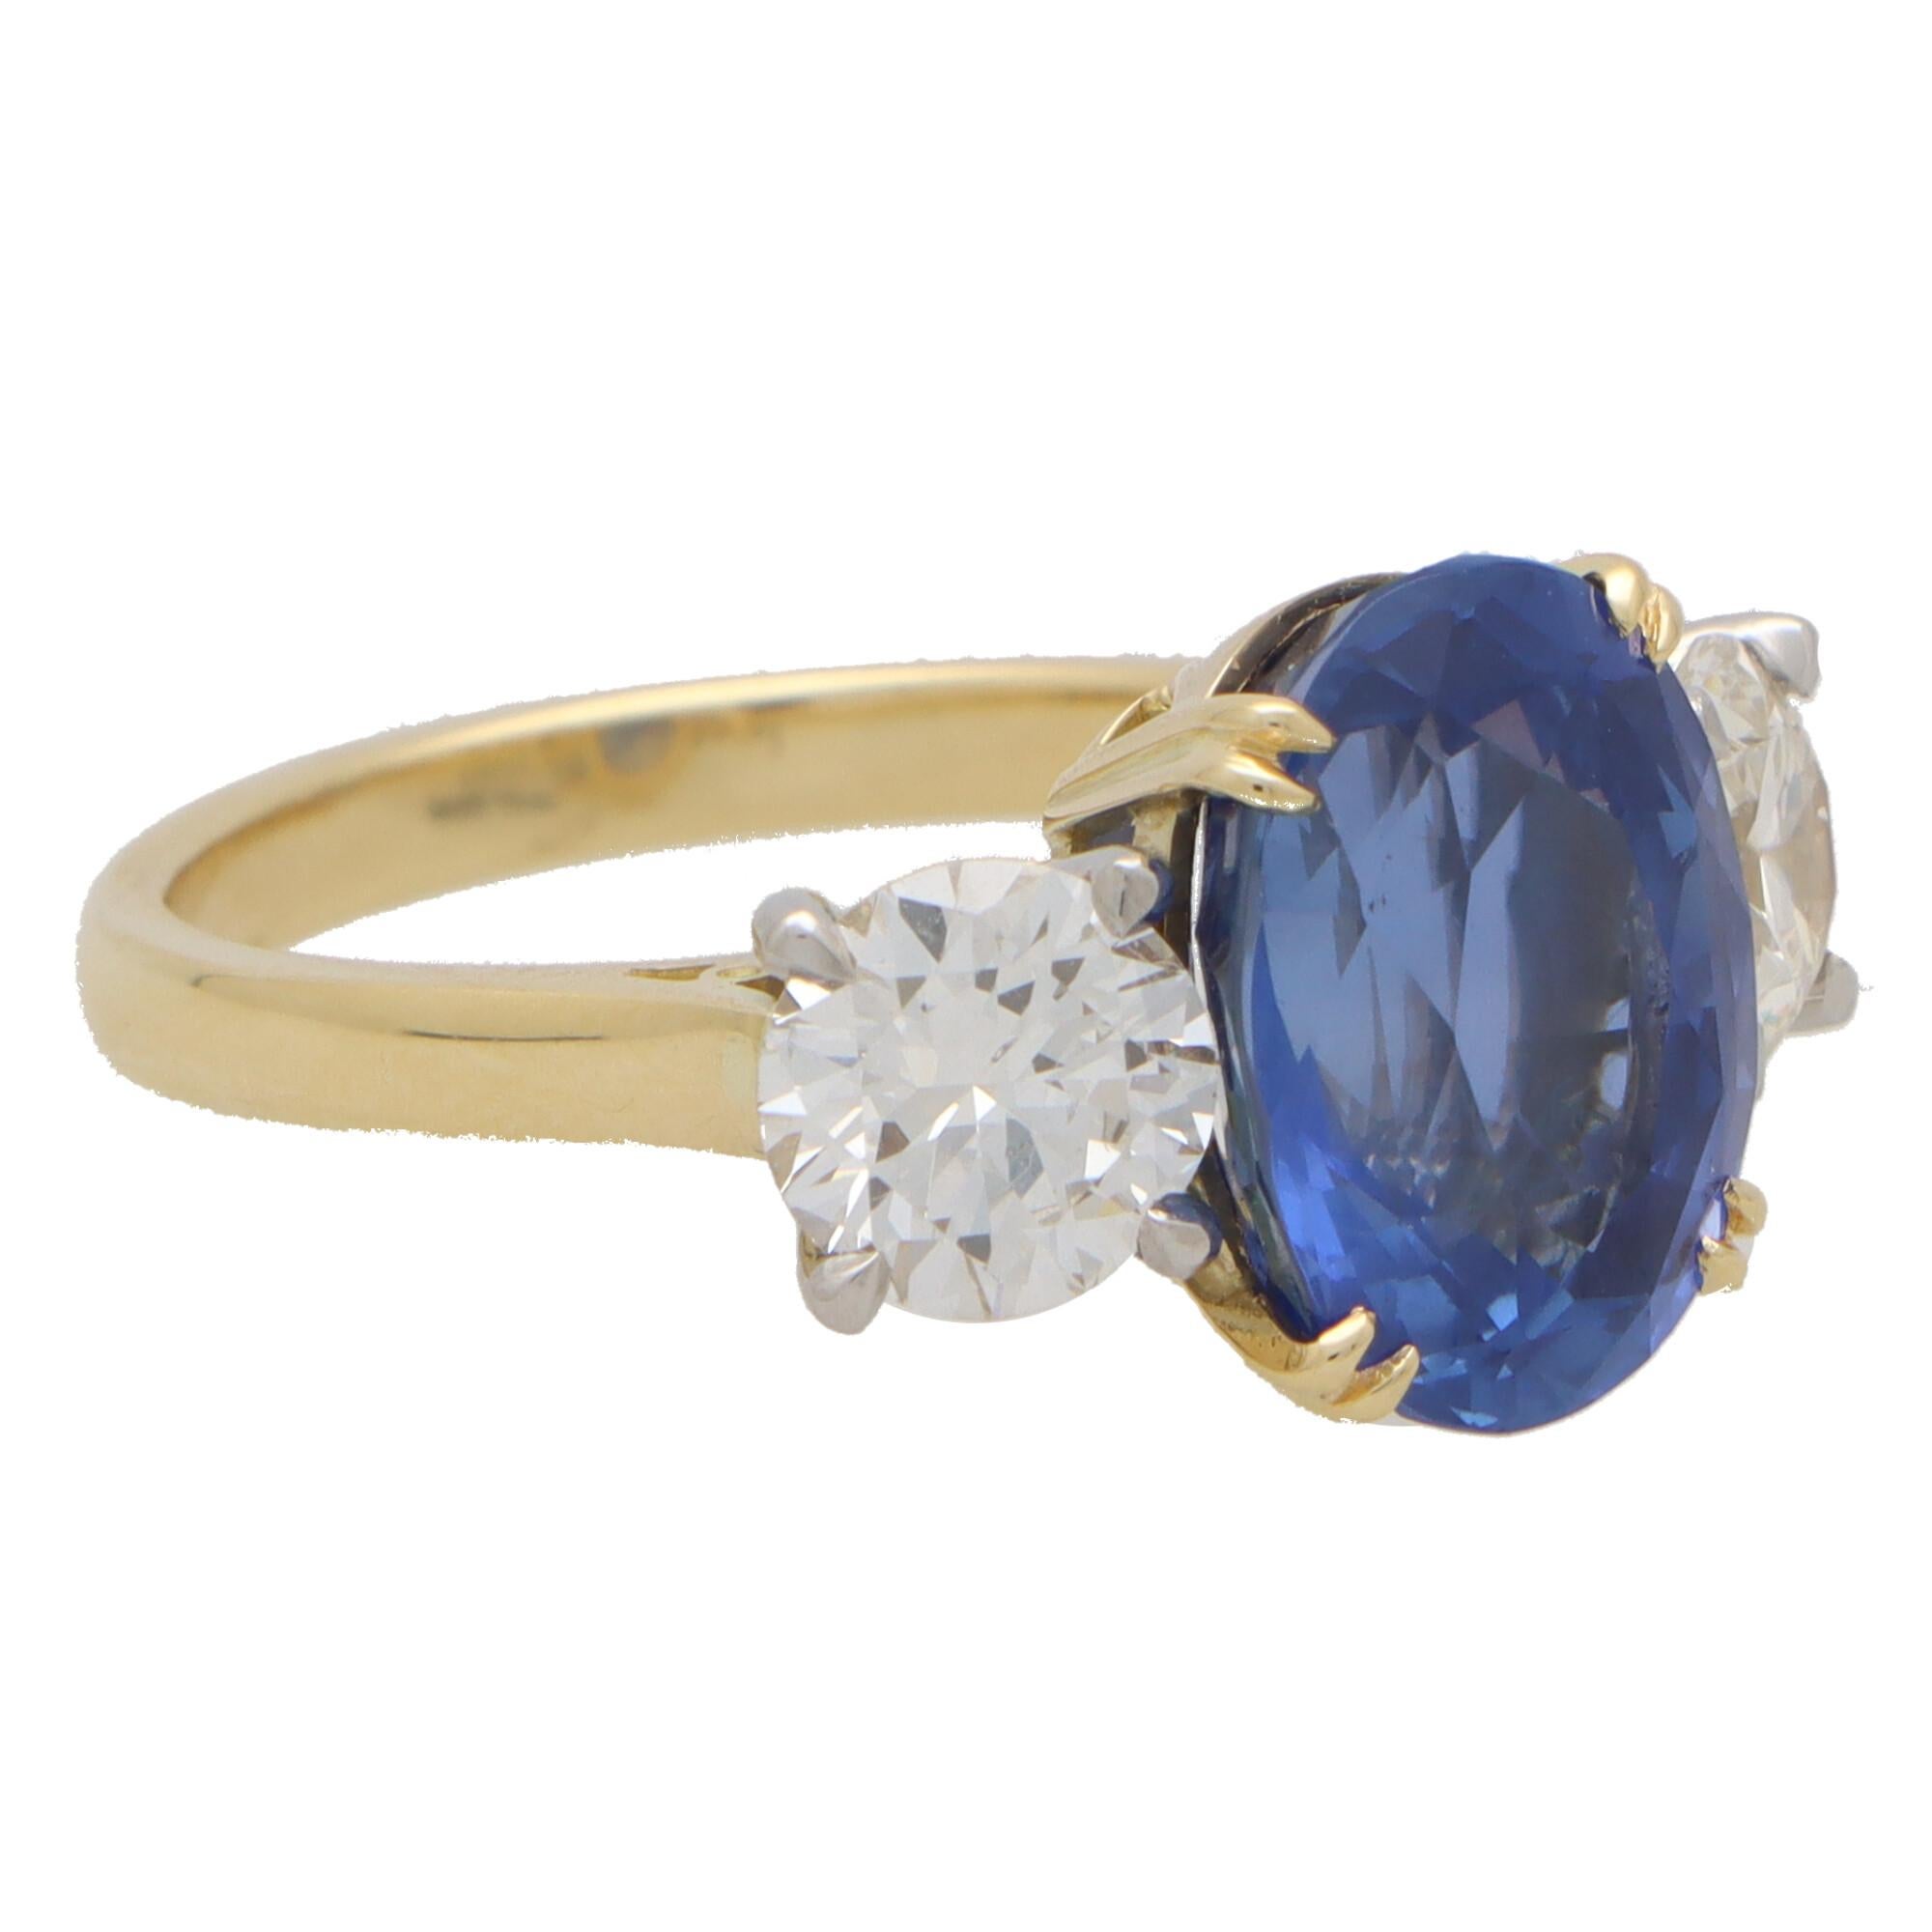 Women's or Men's Certified 7.18ct Sapphire and Diamond Three Stone Ring Set in 18k Yellow Gold